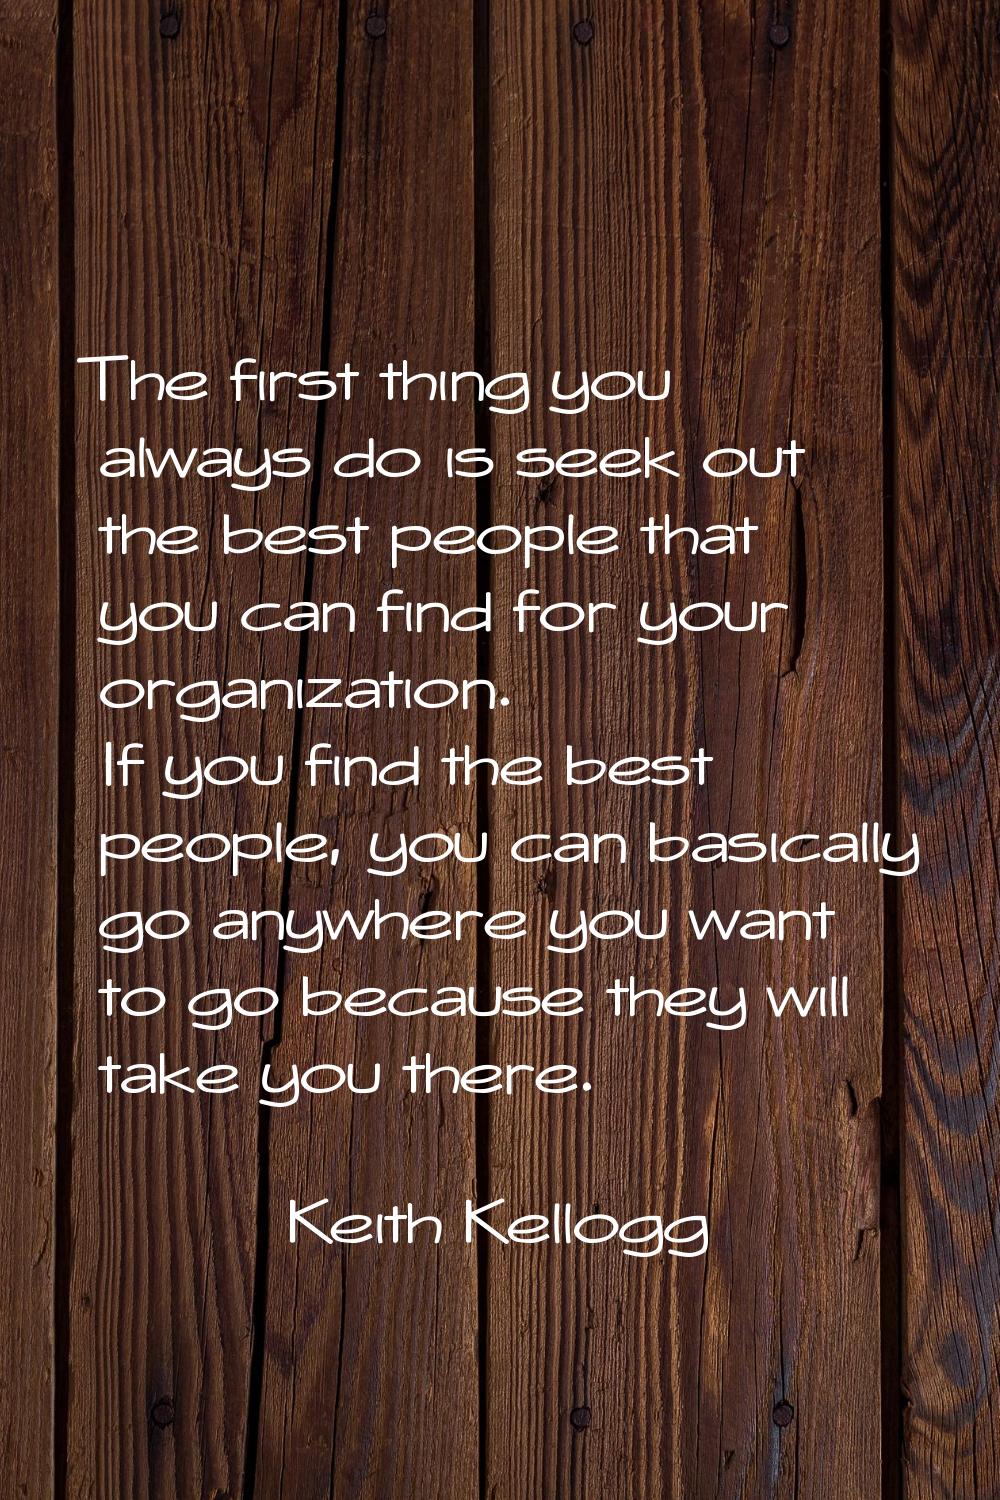 The first thing you always do is seek out the best people that you can find for your organization. 